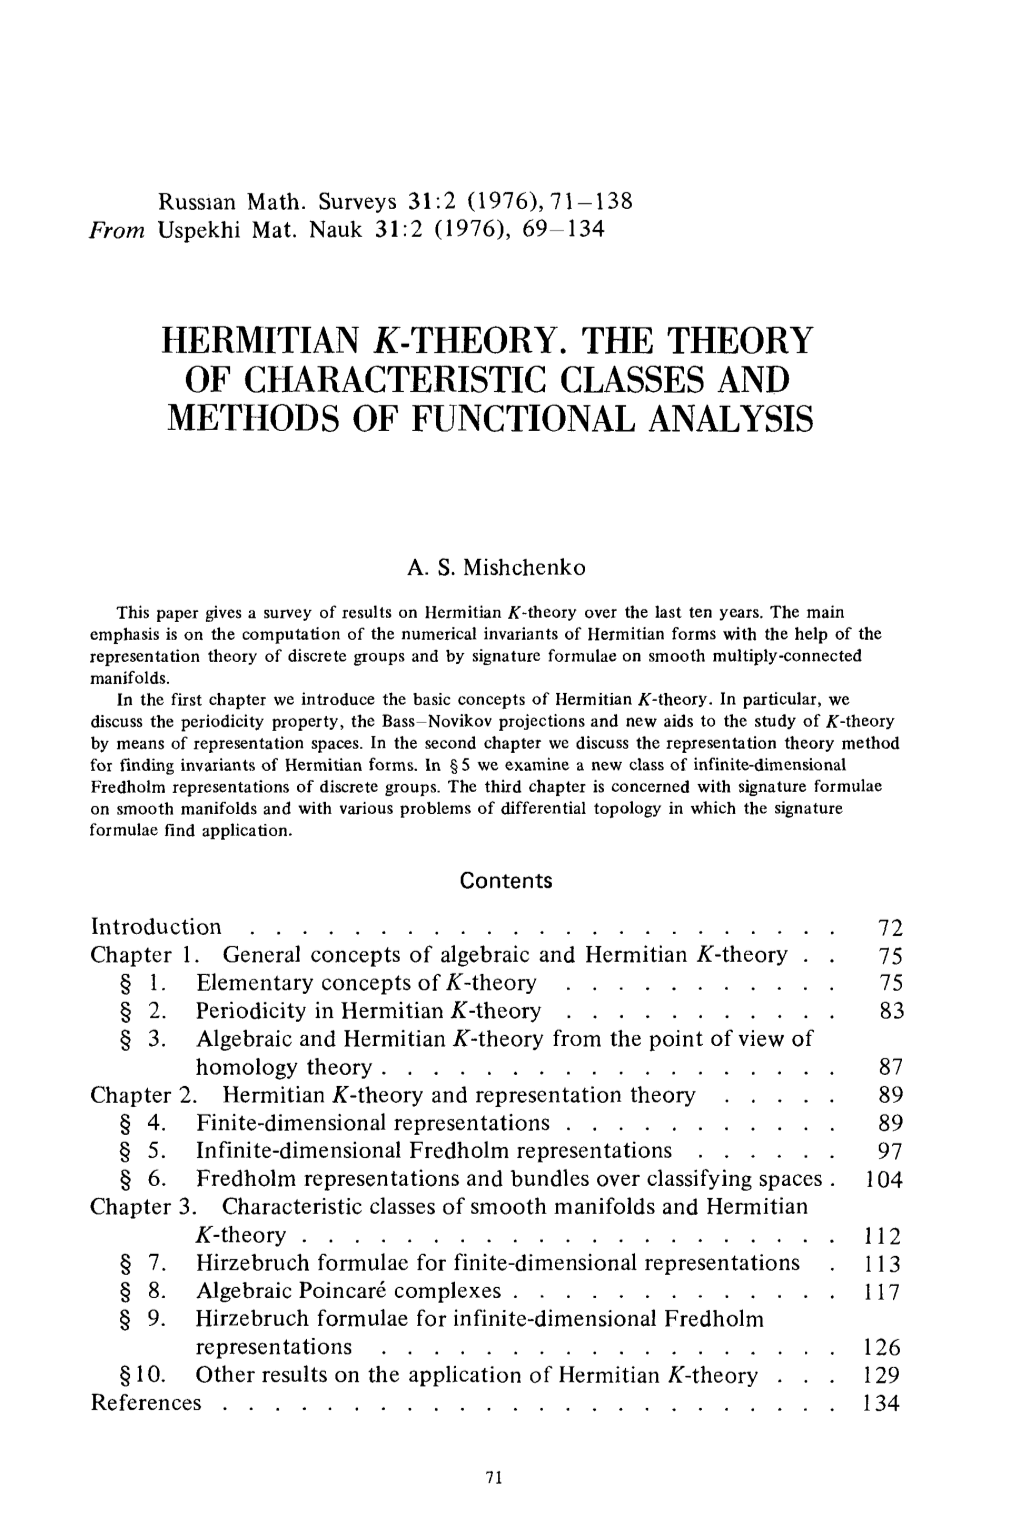 Hermitian K-Theory. the Theory of Characteristic Classes and Methods of Functional Analysis